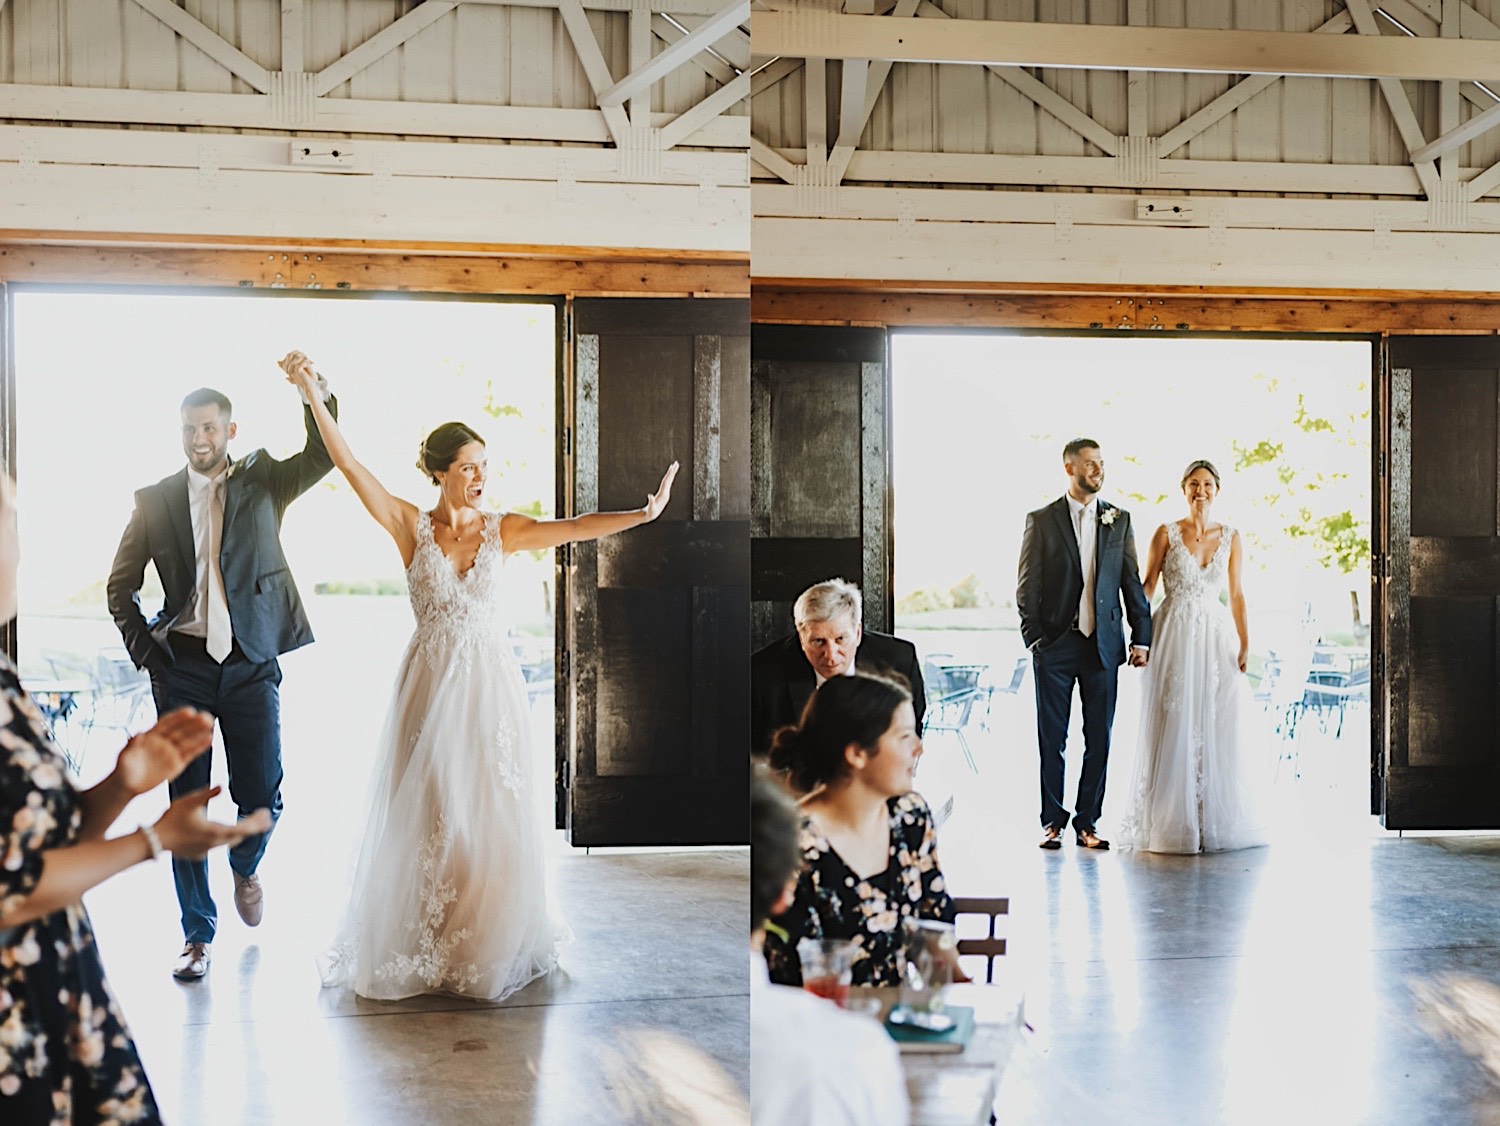 2 photos side by side, the left is of a bride and groom celebrating as they enter their wedding reception, the right is of them standing and smiling about to enter the reception space